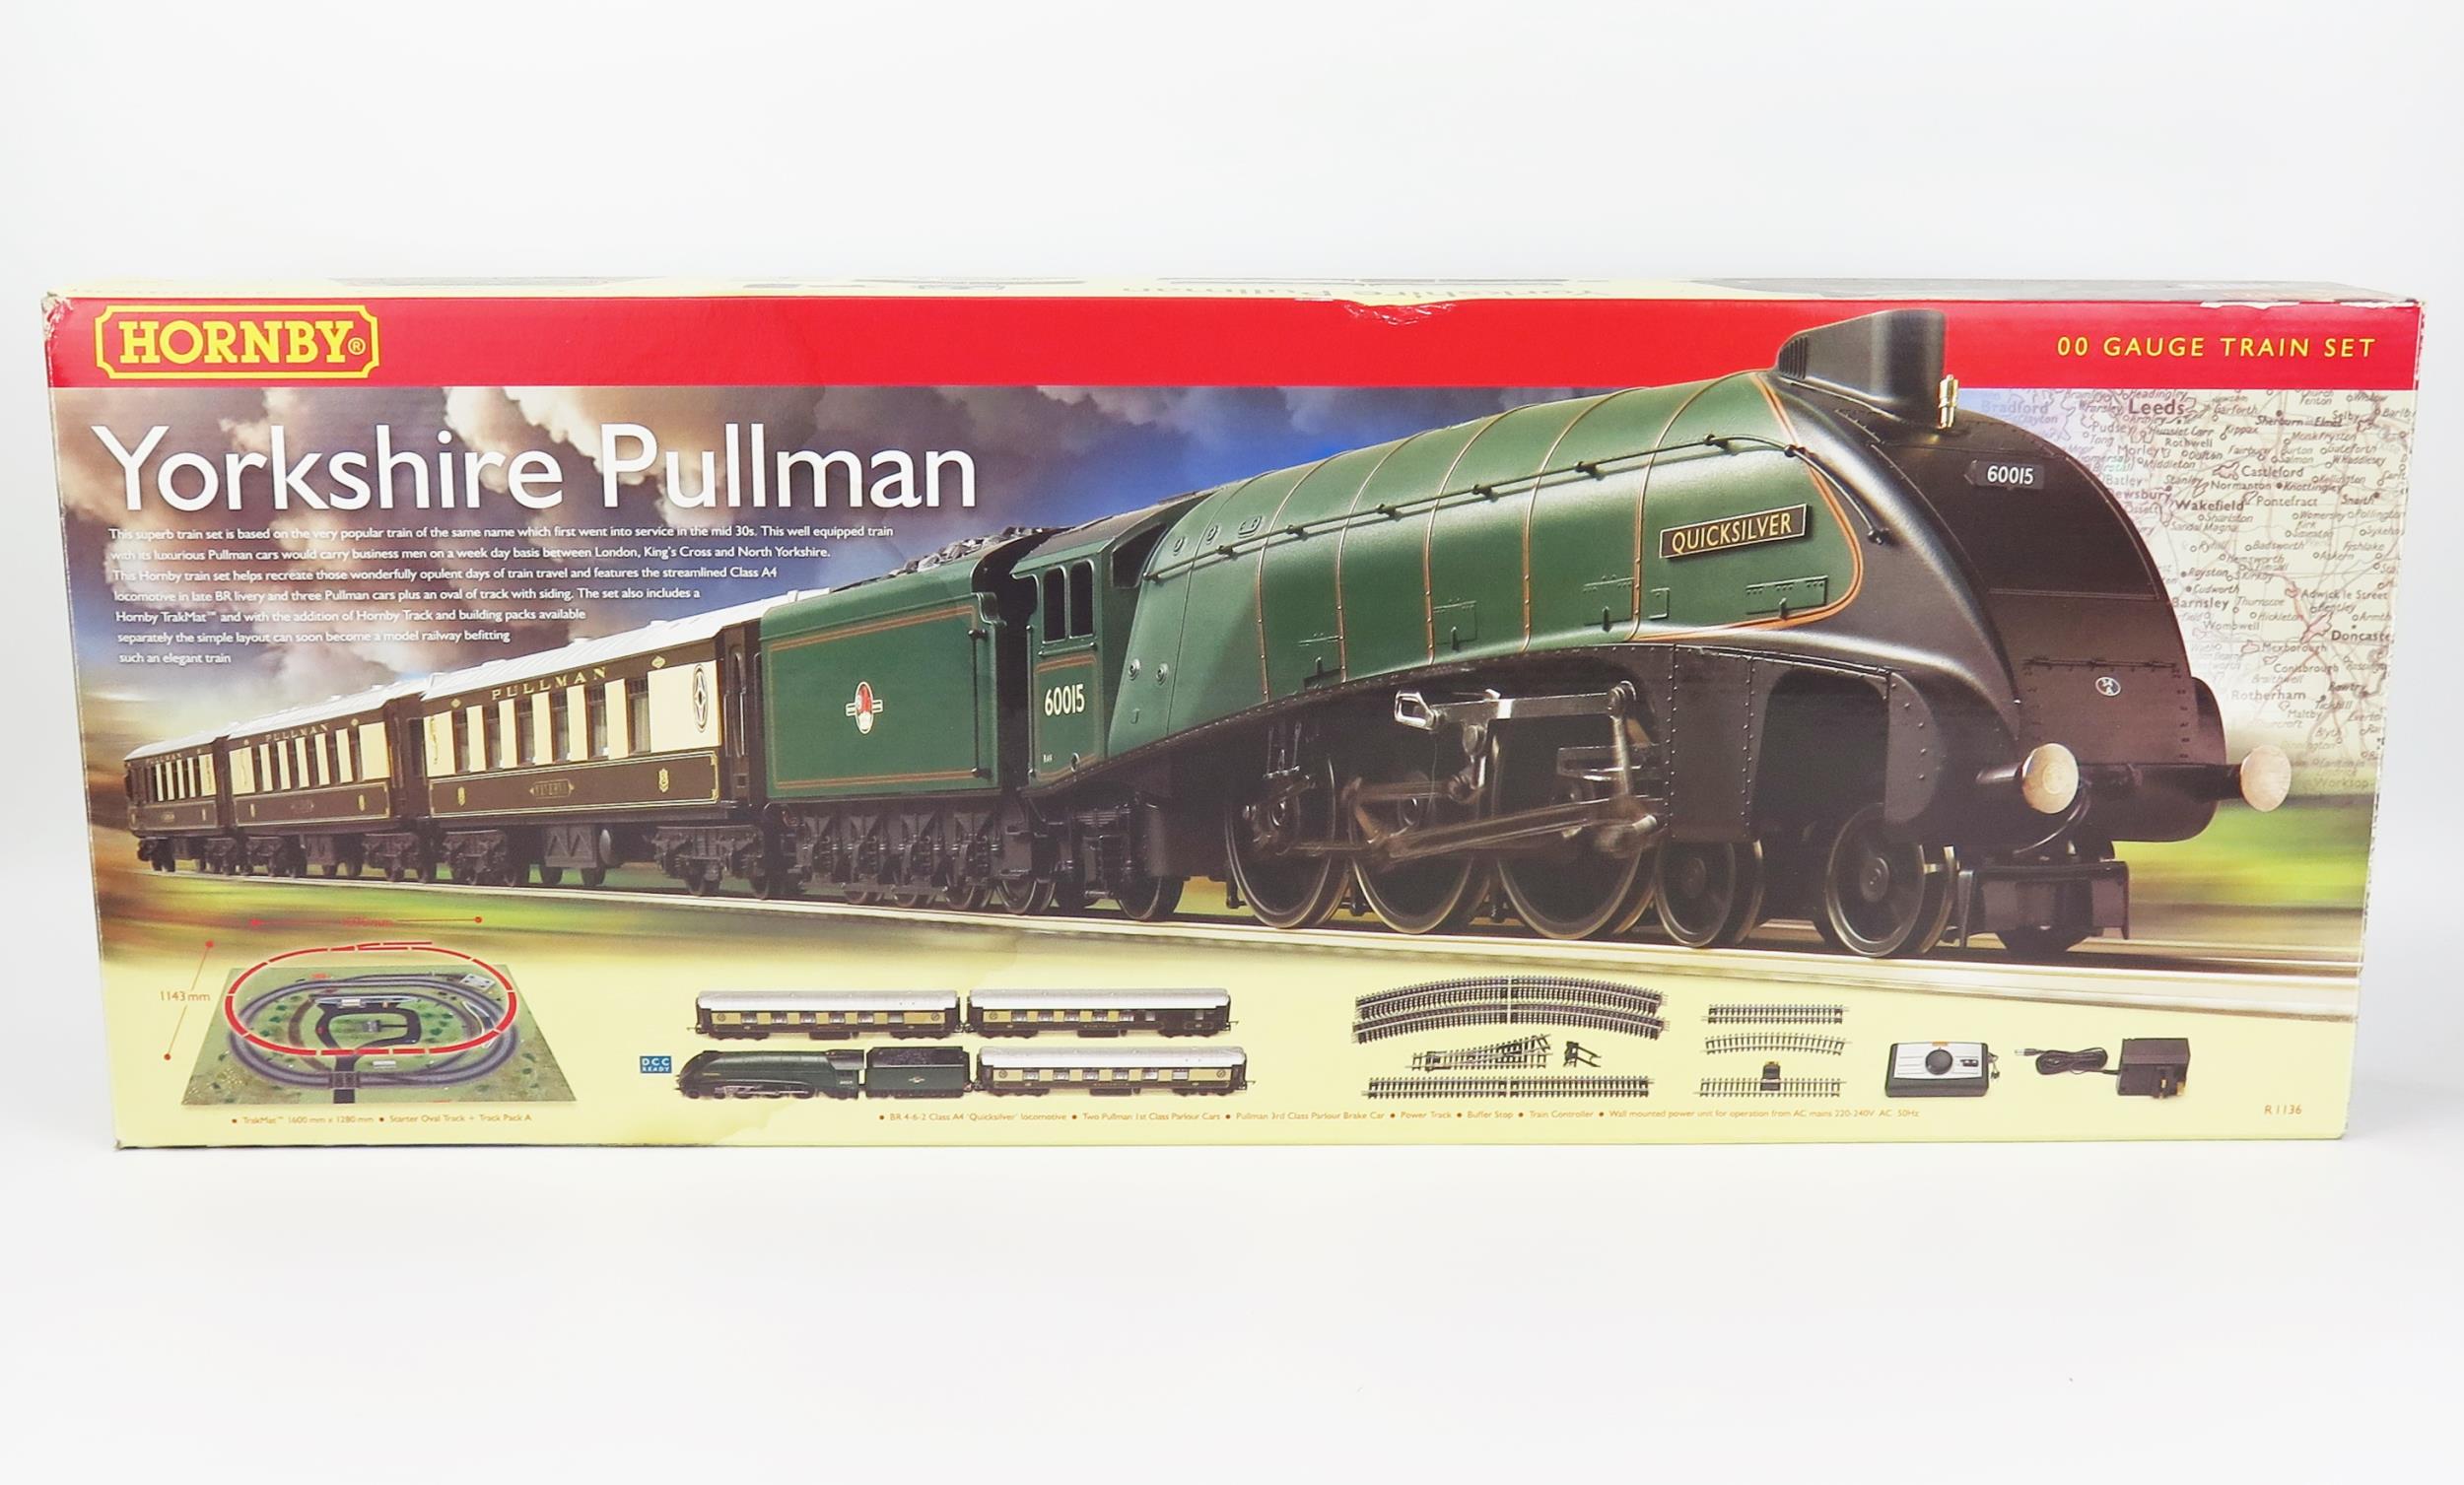 Hornby OO Gauge R1136 Yorkshire Pullman Train Set, DCC Ready - excellent in box (no trakmat)